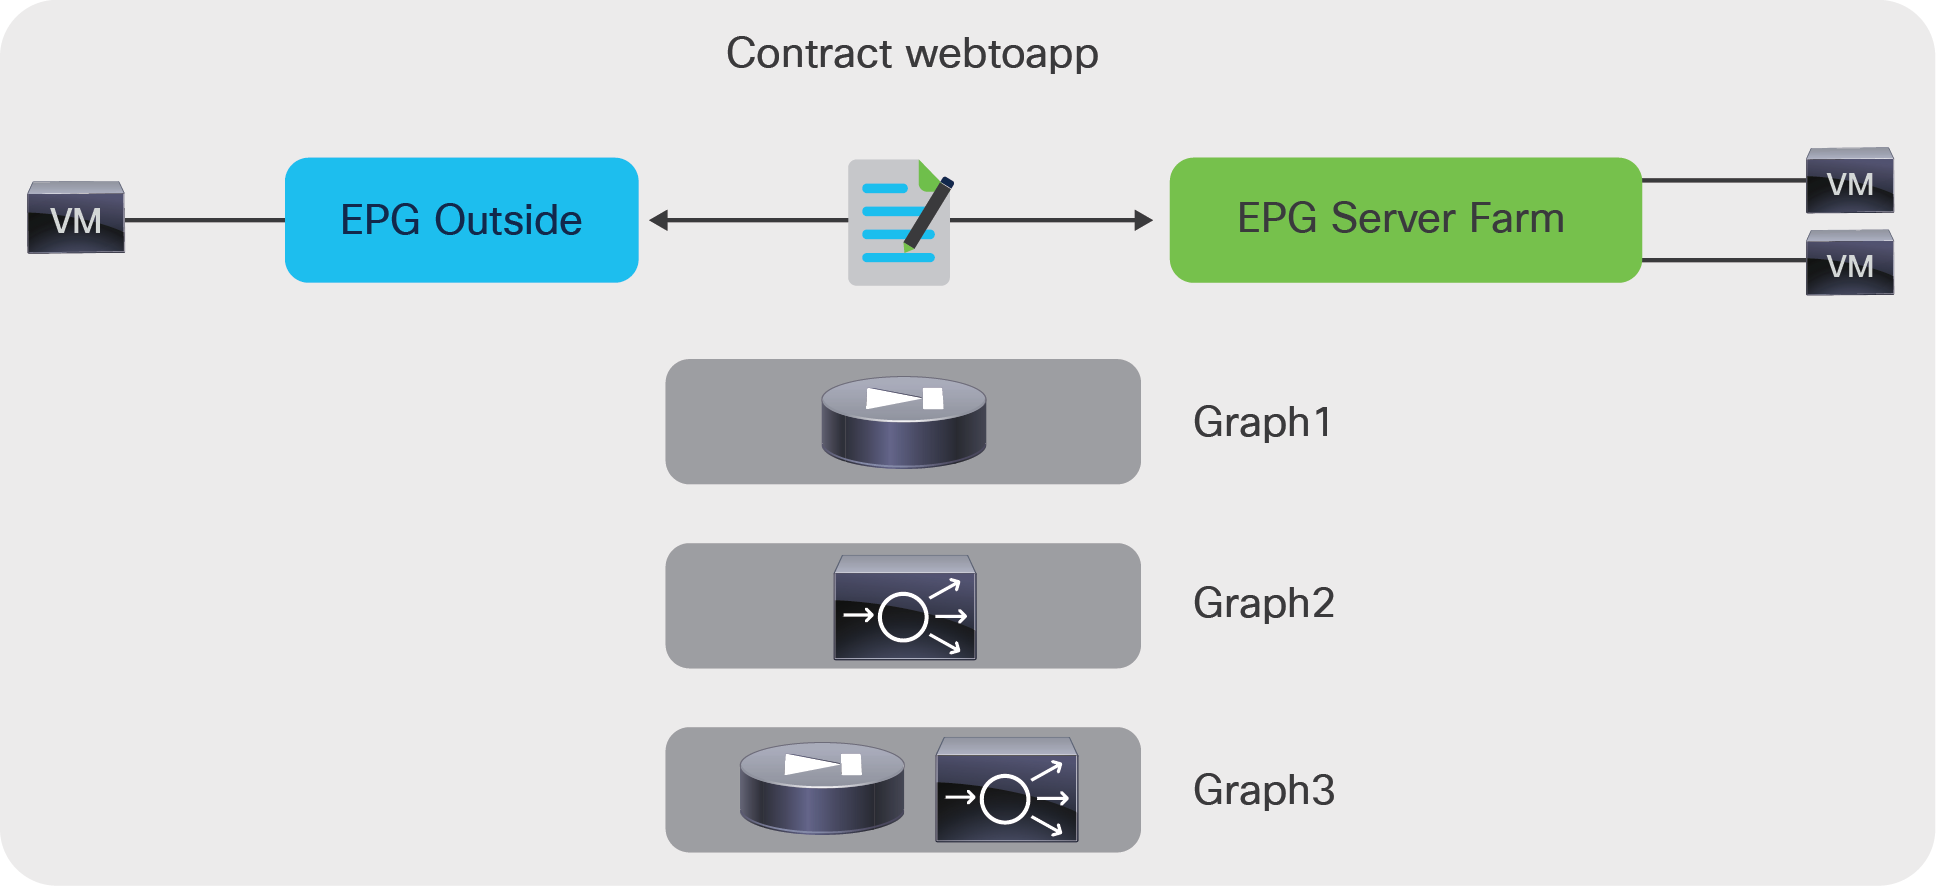 A service graph is inserted between EPGs through a contract